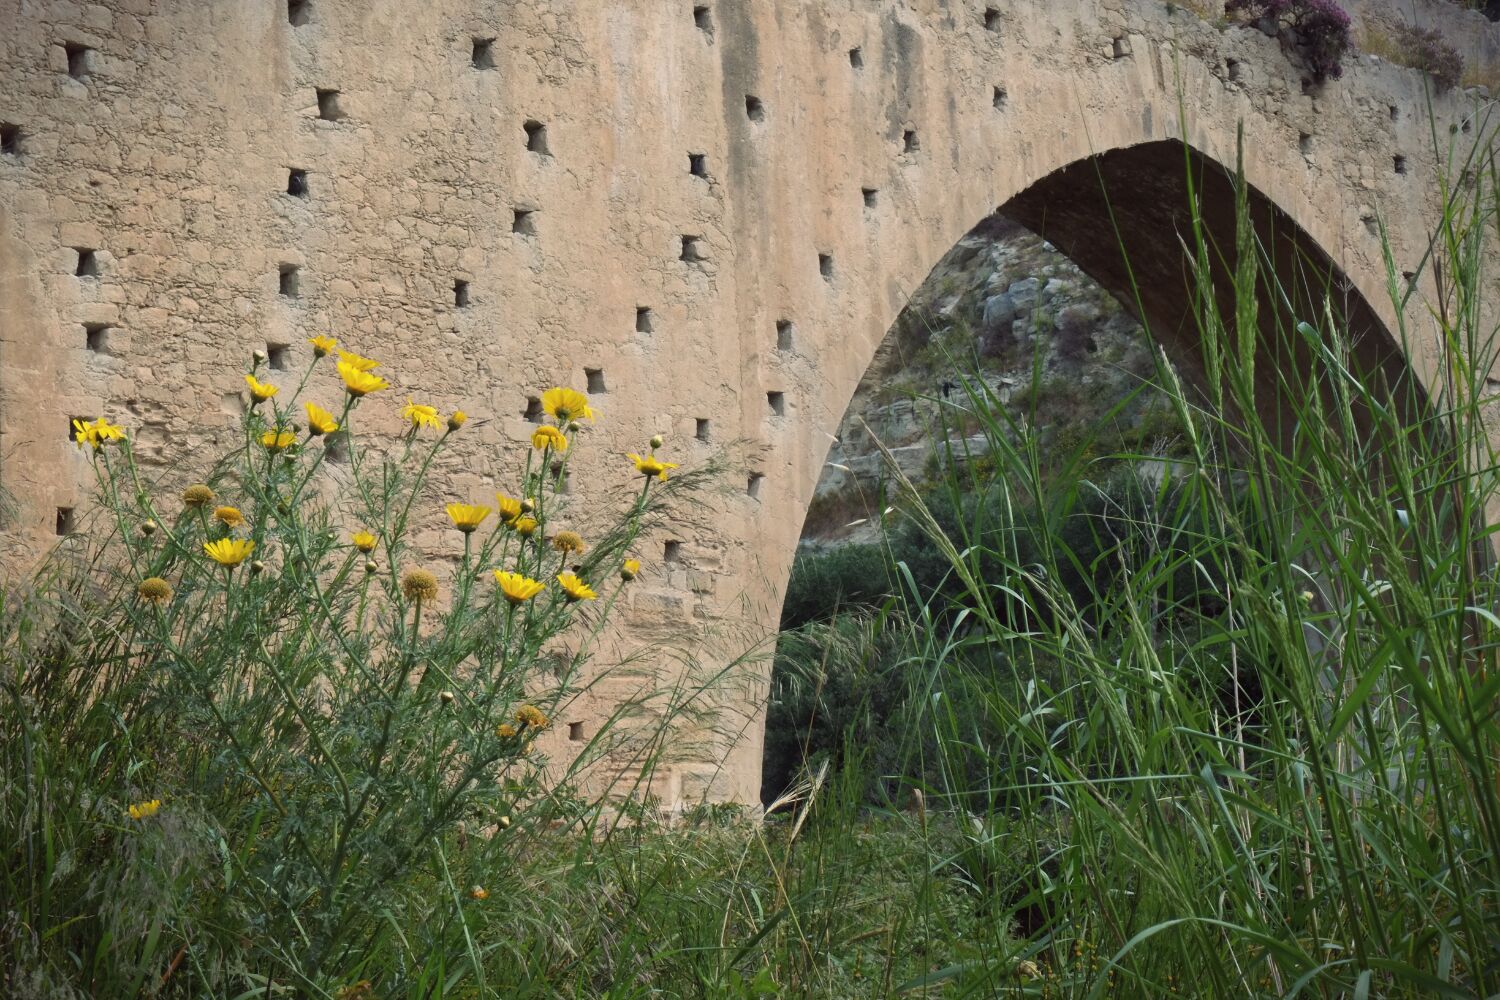 ..while the last village featured an impressive aqueduct, it dates from 1600.